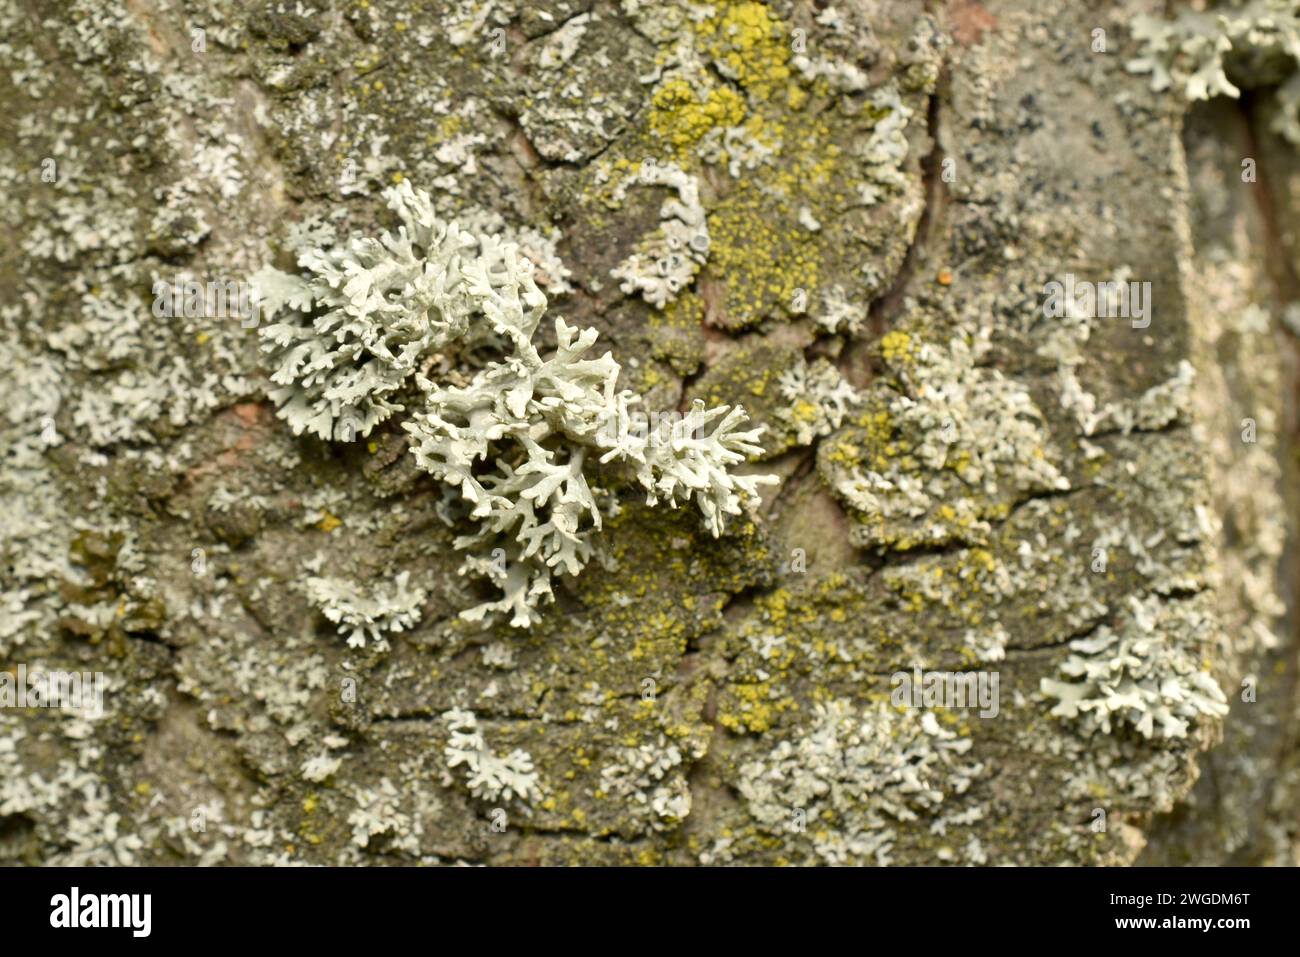 Texture pattern created by nature. Lichen grows on the bark of a tree. Stock Photo